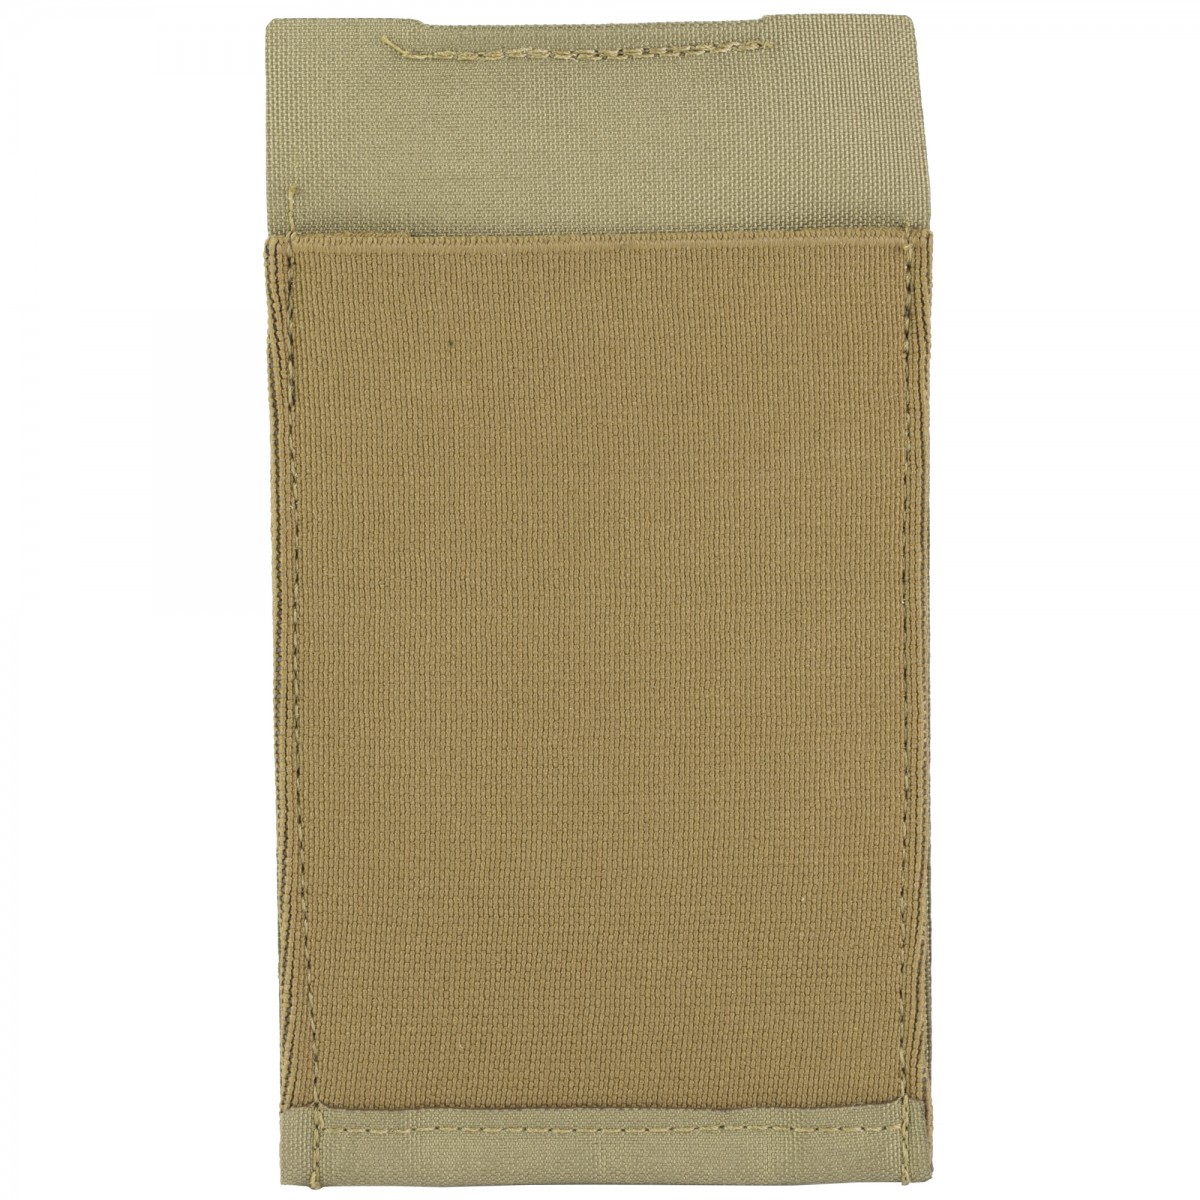 Blue Force Gear Ten-Speed Horizontal Magazine Pouch for AR-15 Magazines